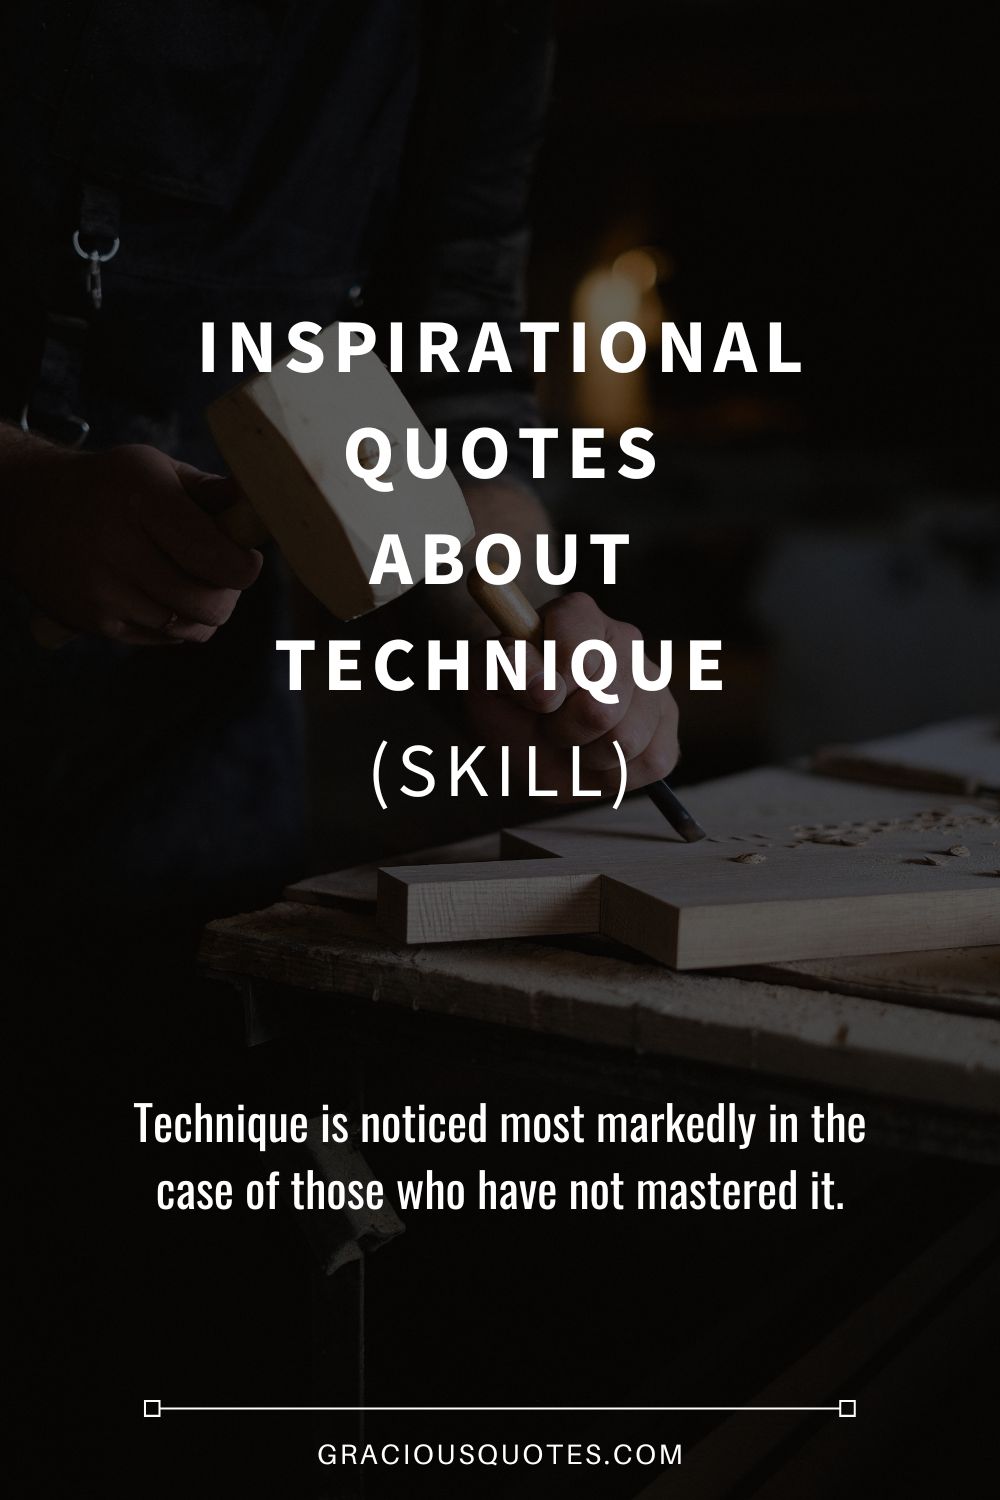 Inspirational Quotes About Technique (SKILL) - Gracious Quotes